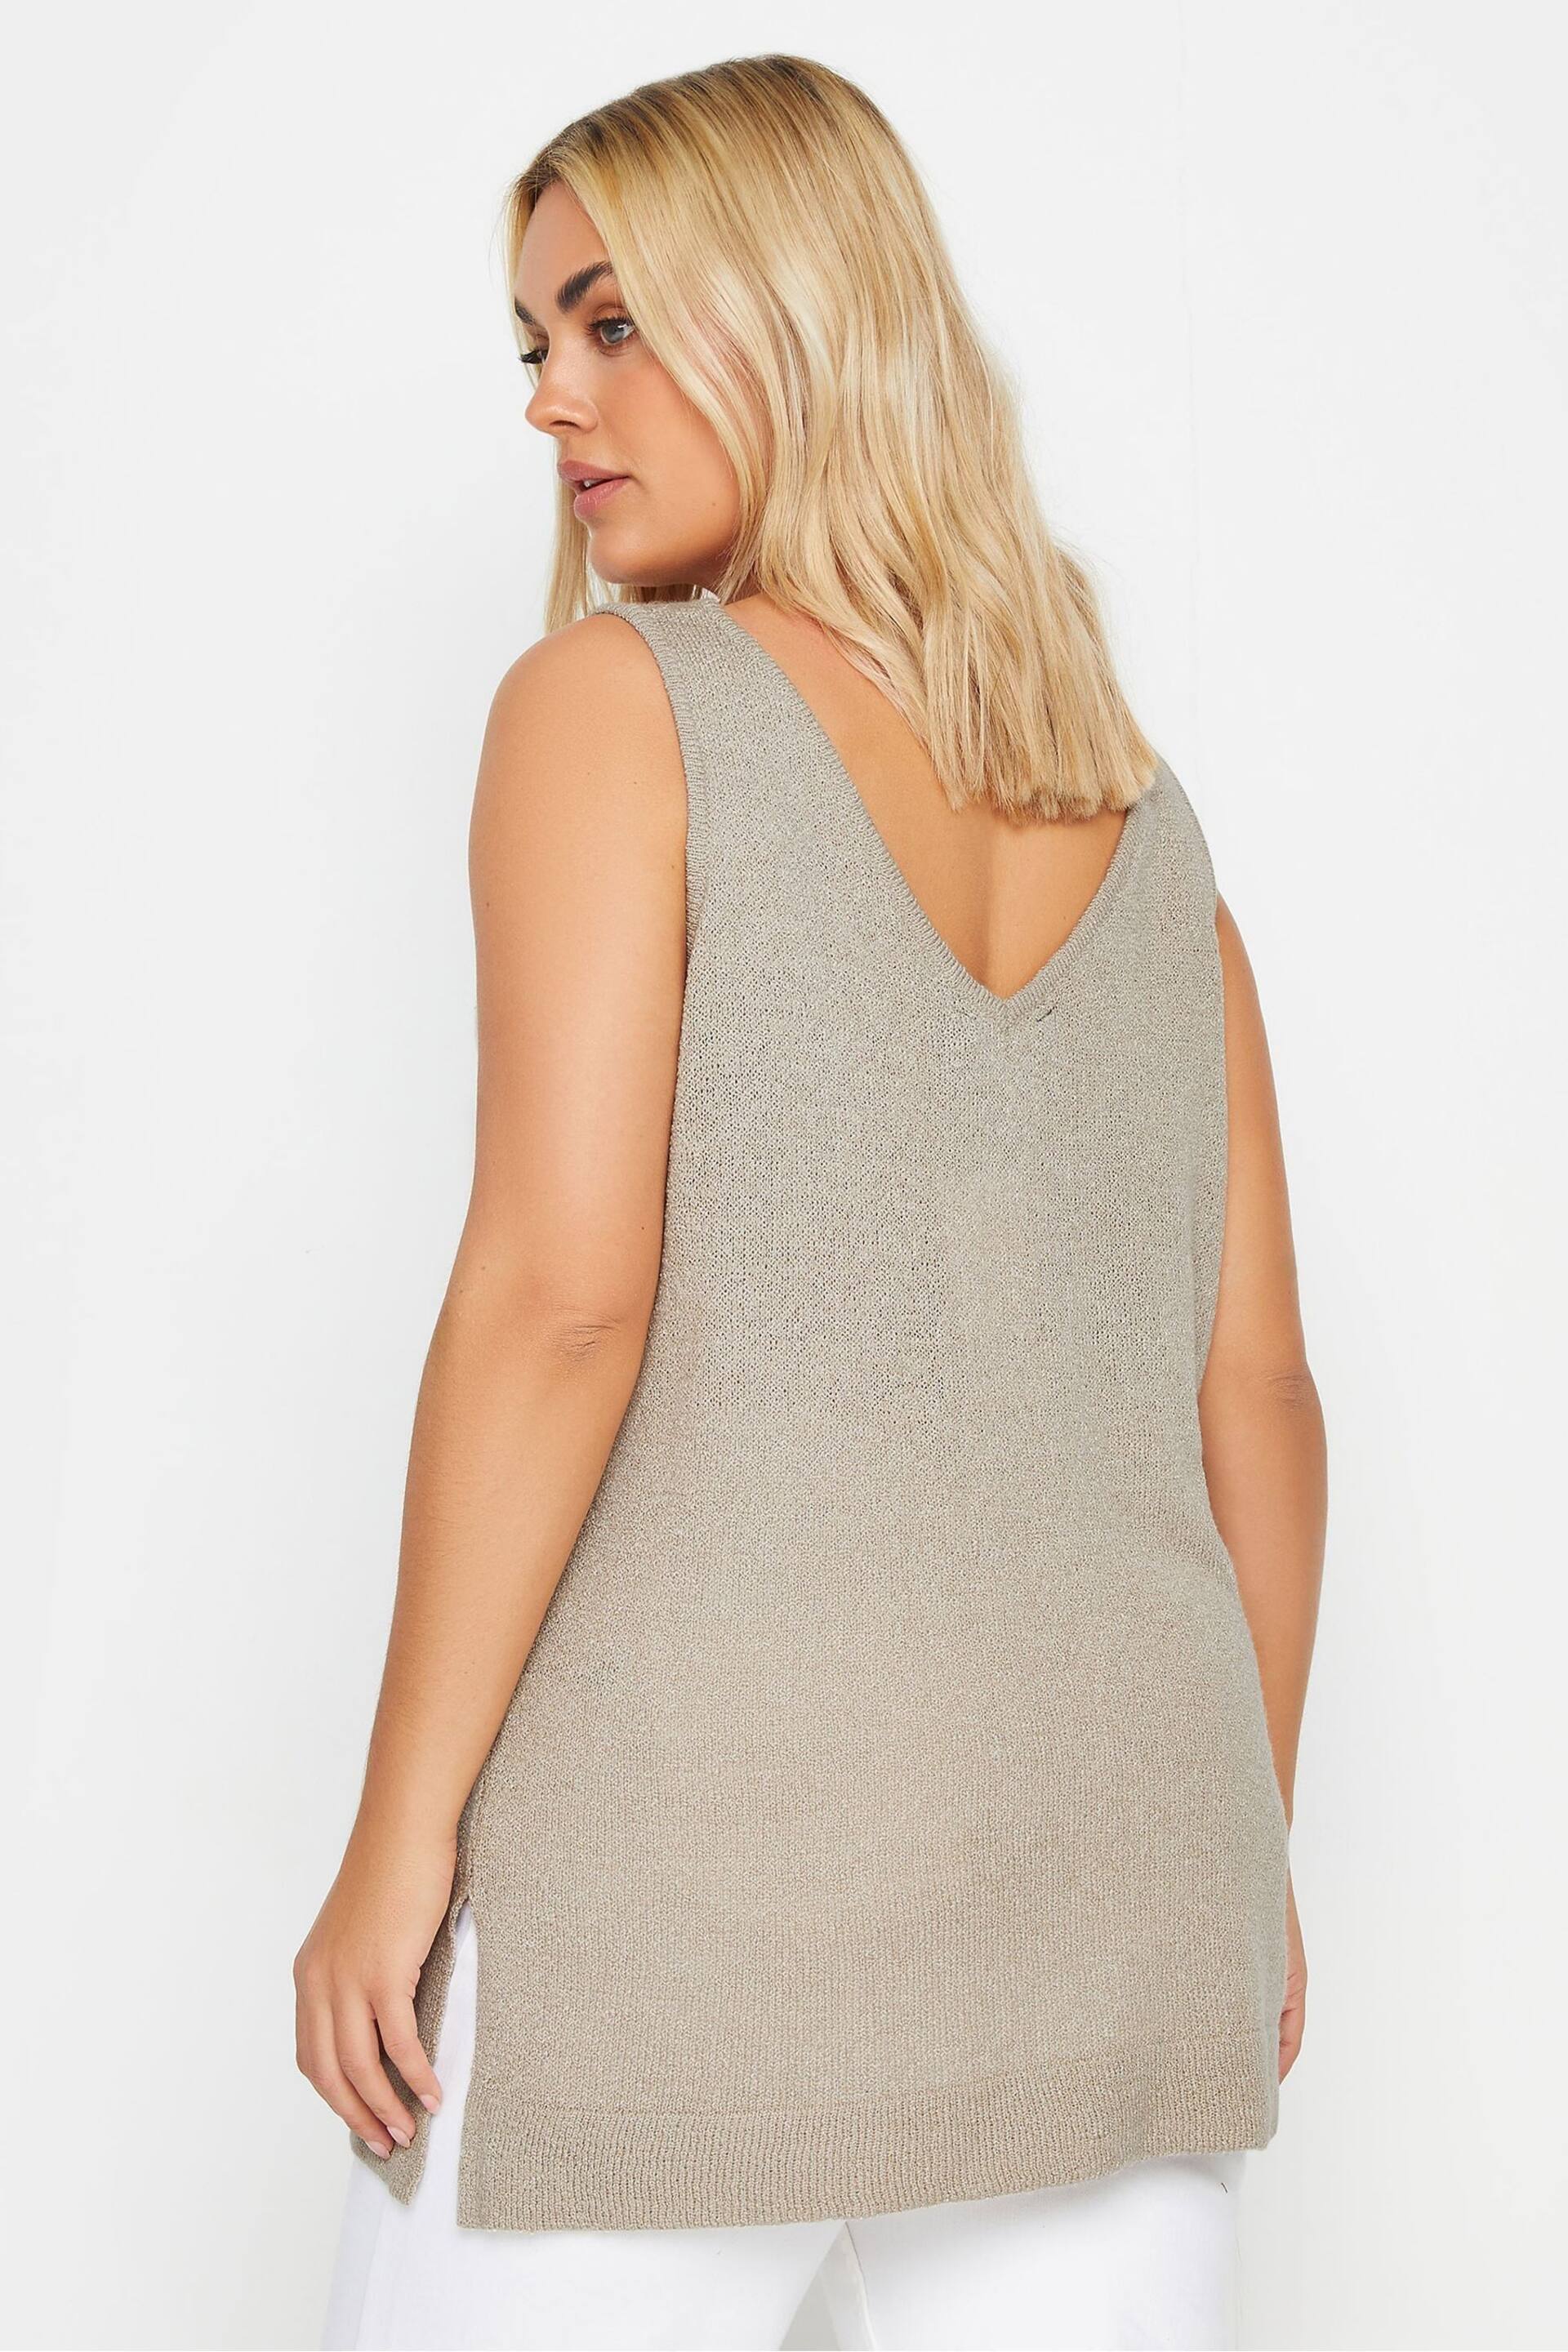 Yours Curve Natural Knitted Vest Top - Image 4 of 5